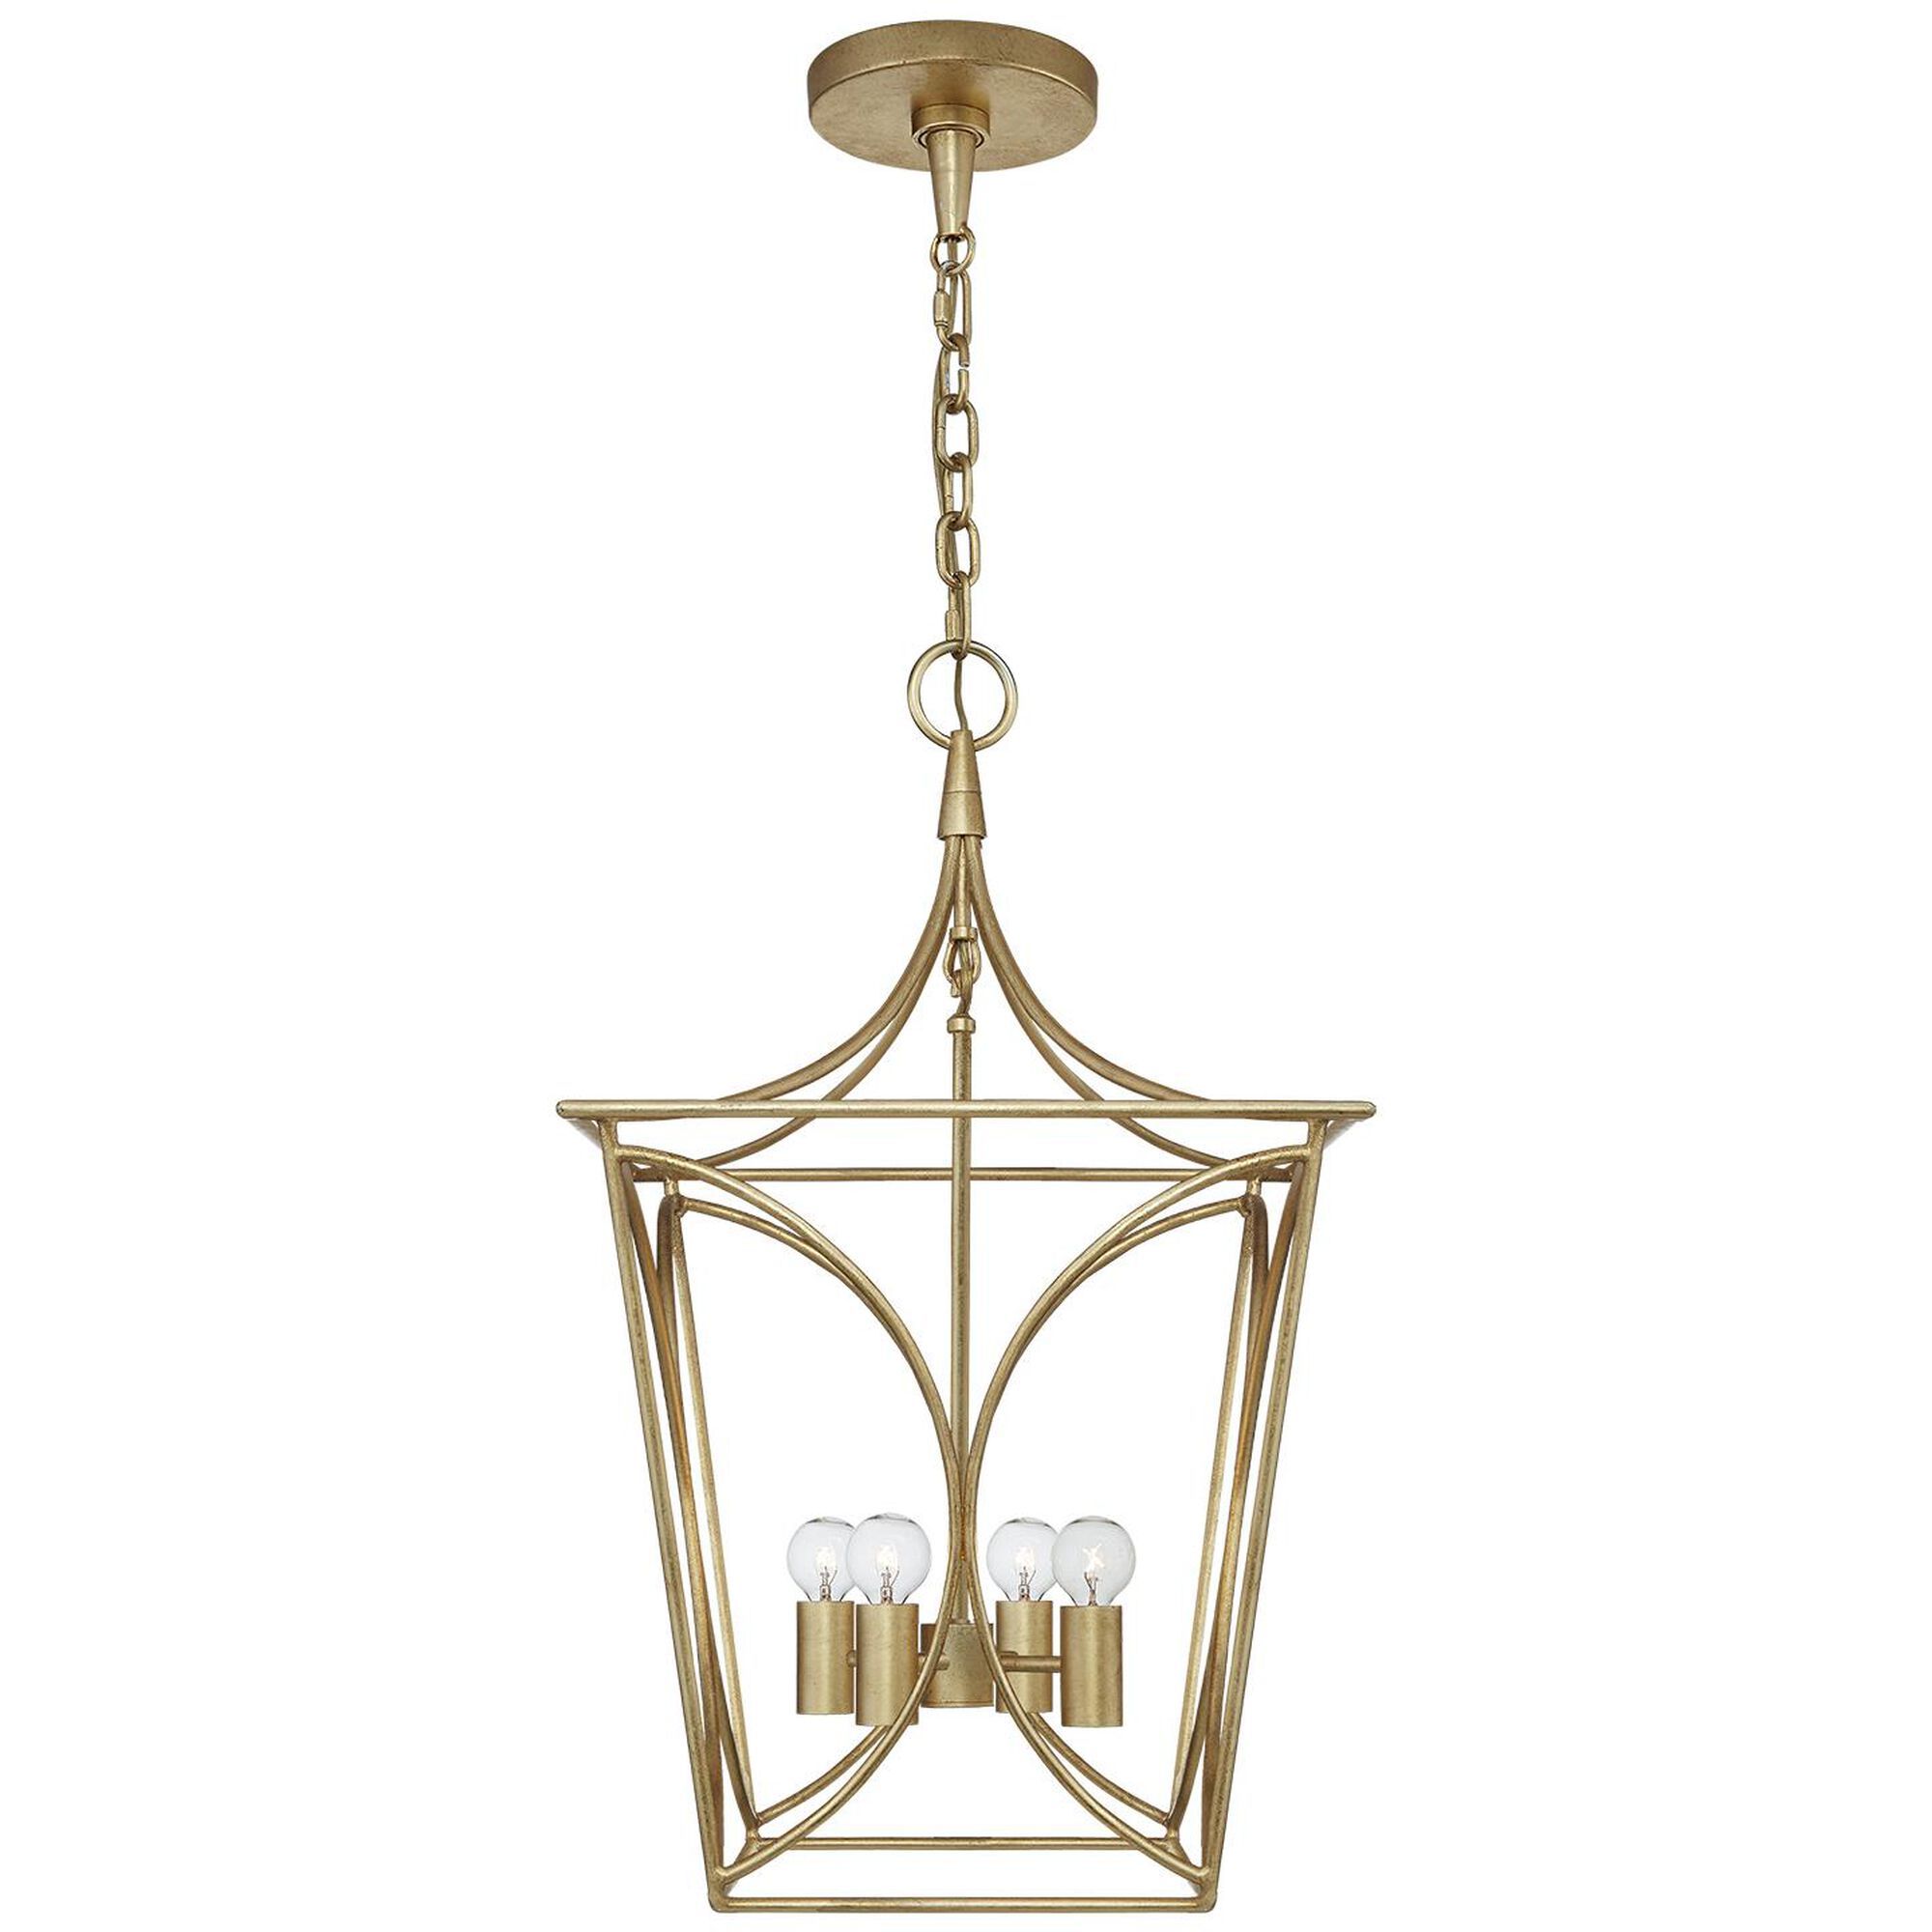 Kate Spade New York Cavanagh 13 Inch Cage Pendant by Visual Comfort and Co. | Capitol Lighting 1800lighting.com